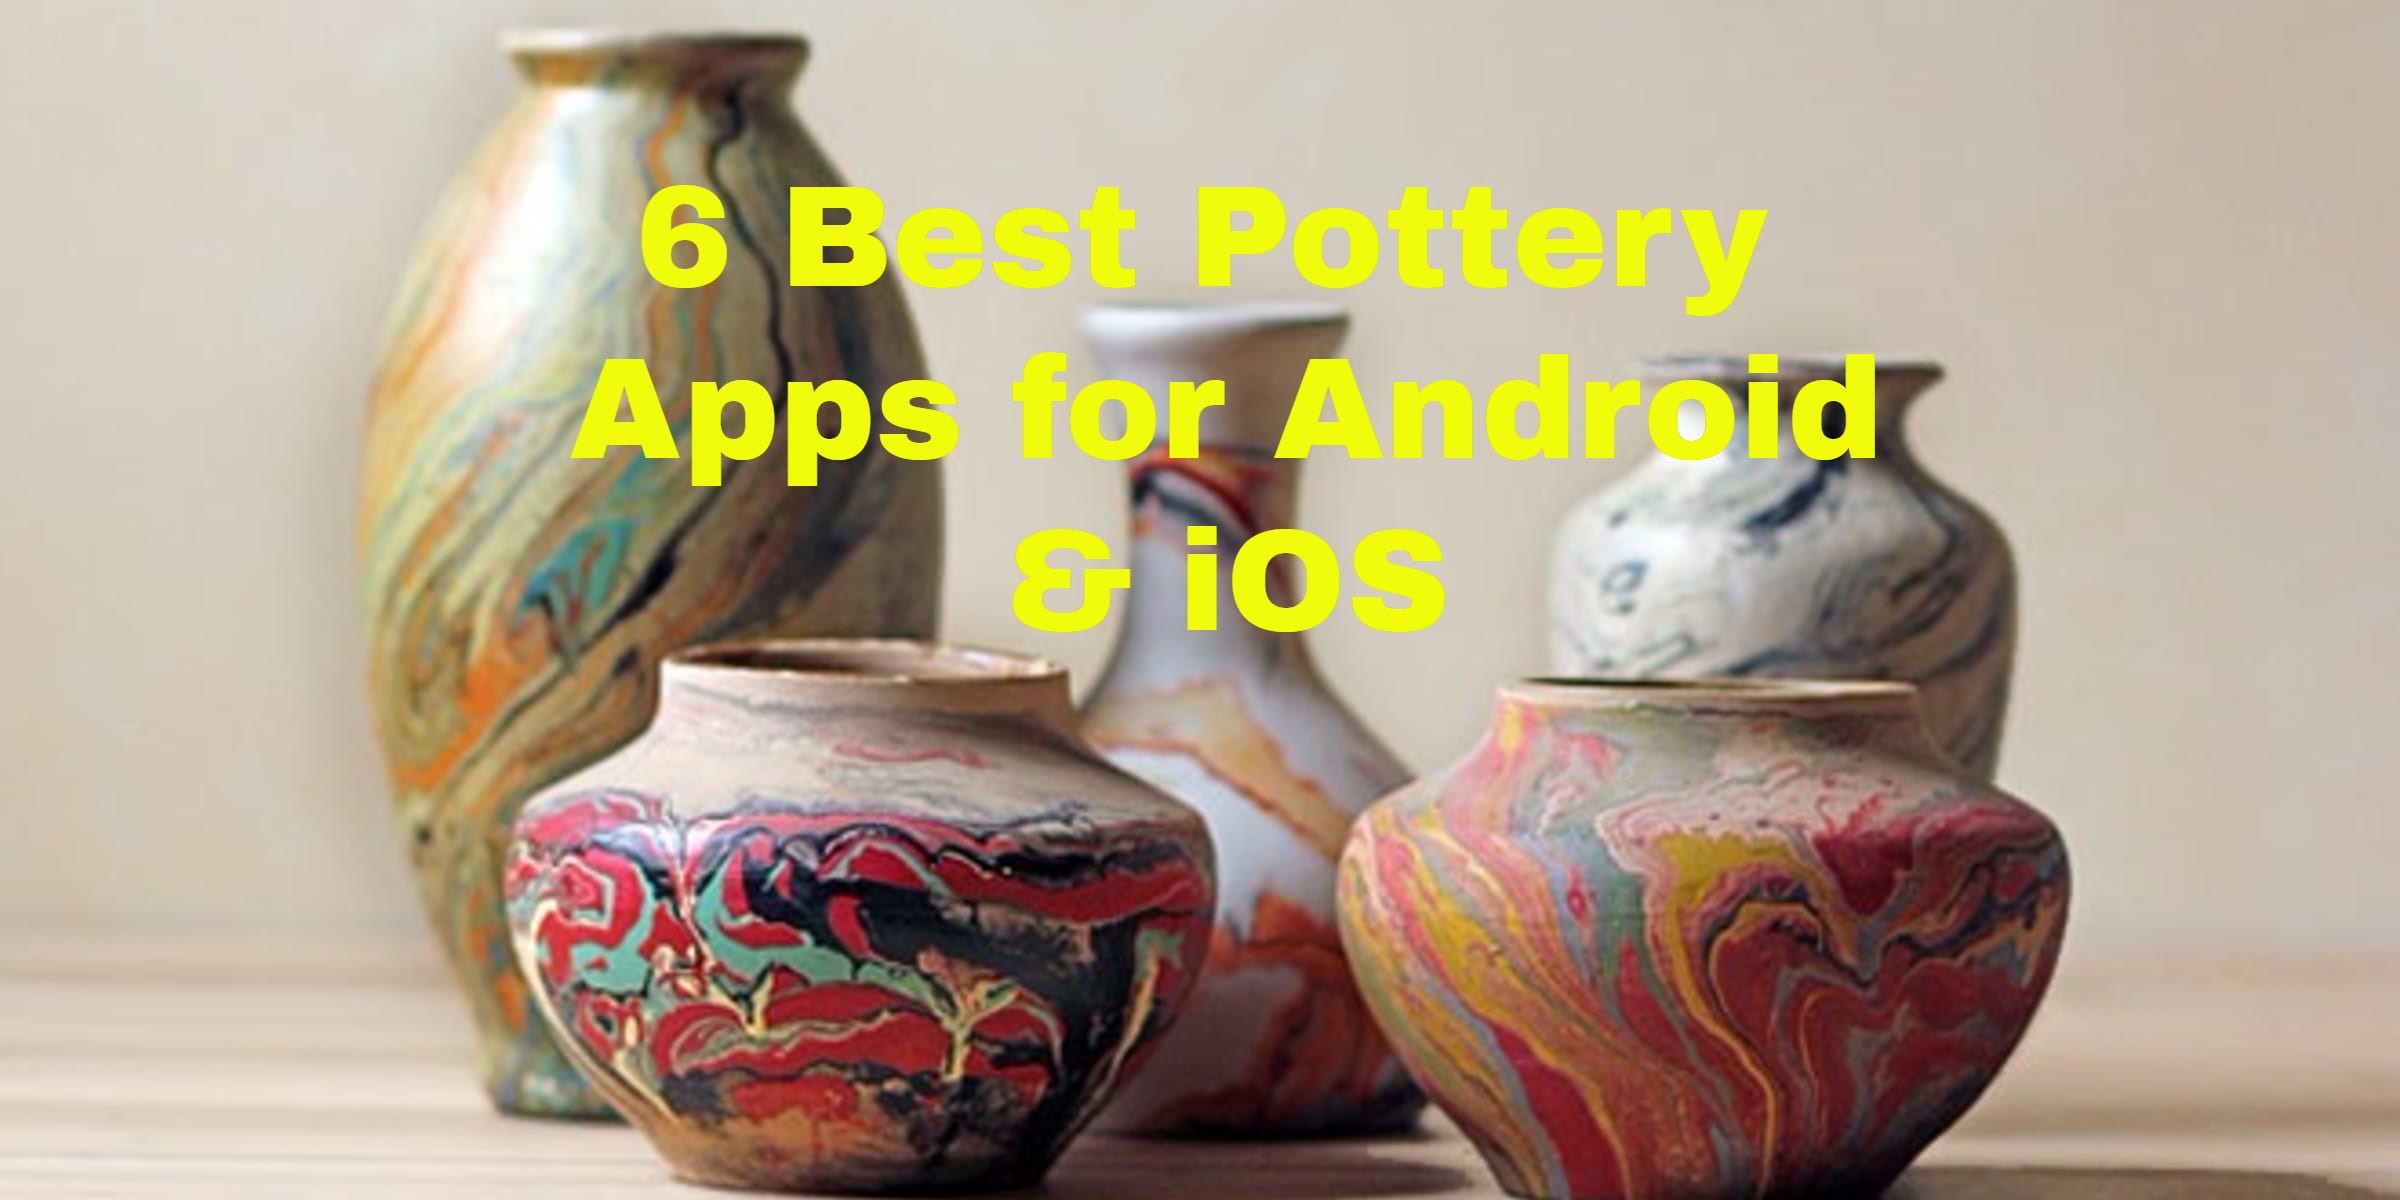 lets create pottery app higest sale price